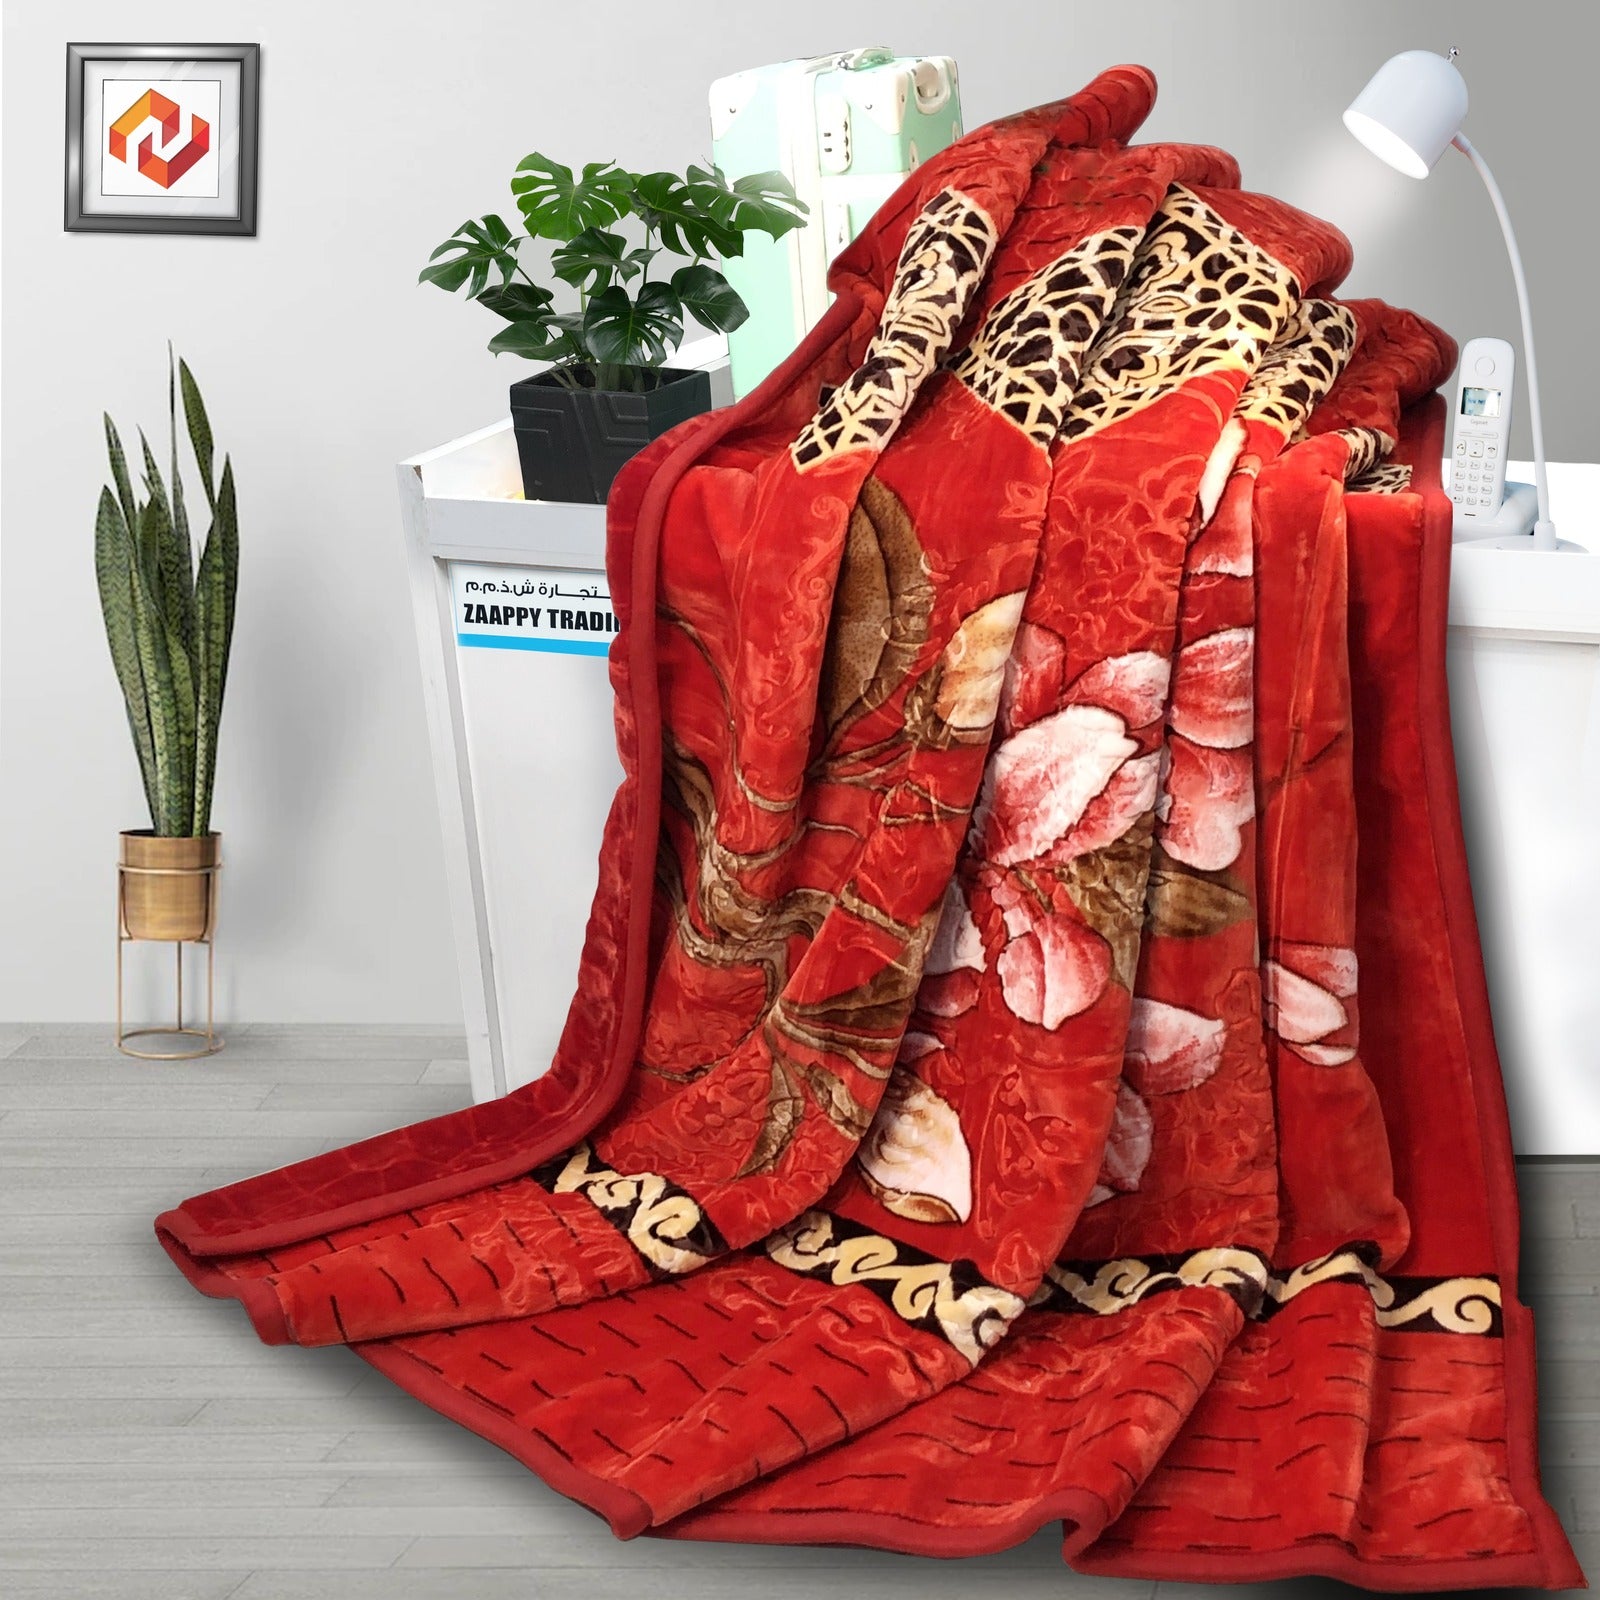 Multi Colour Floral print True Love Soft King Size Blanket 12 Kg For Winter Zaappy